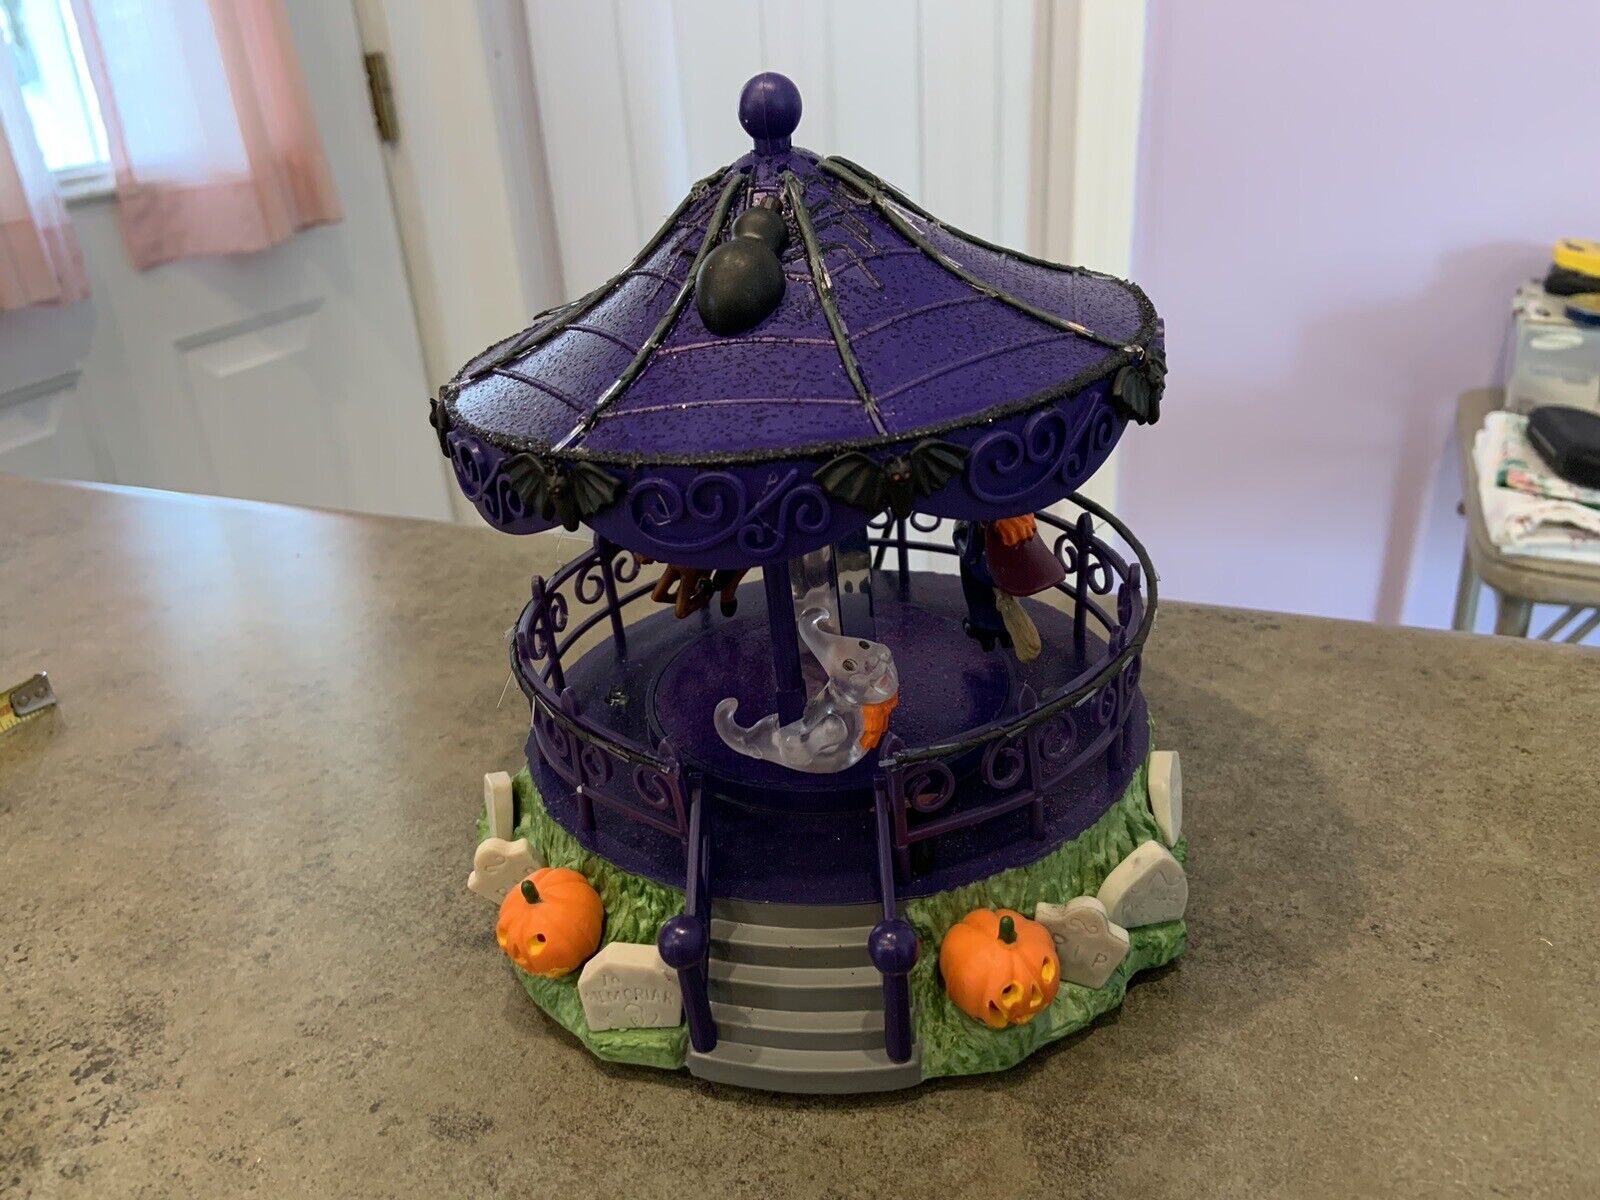 2008 Avon Halloween Light Up Moving Carousel With Spooky Sounds Not Tested Read